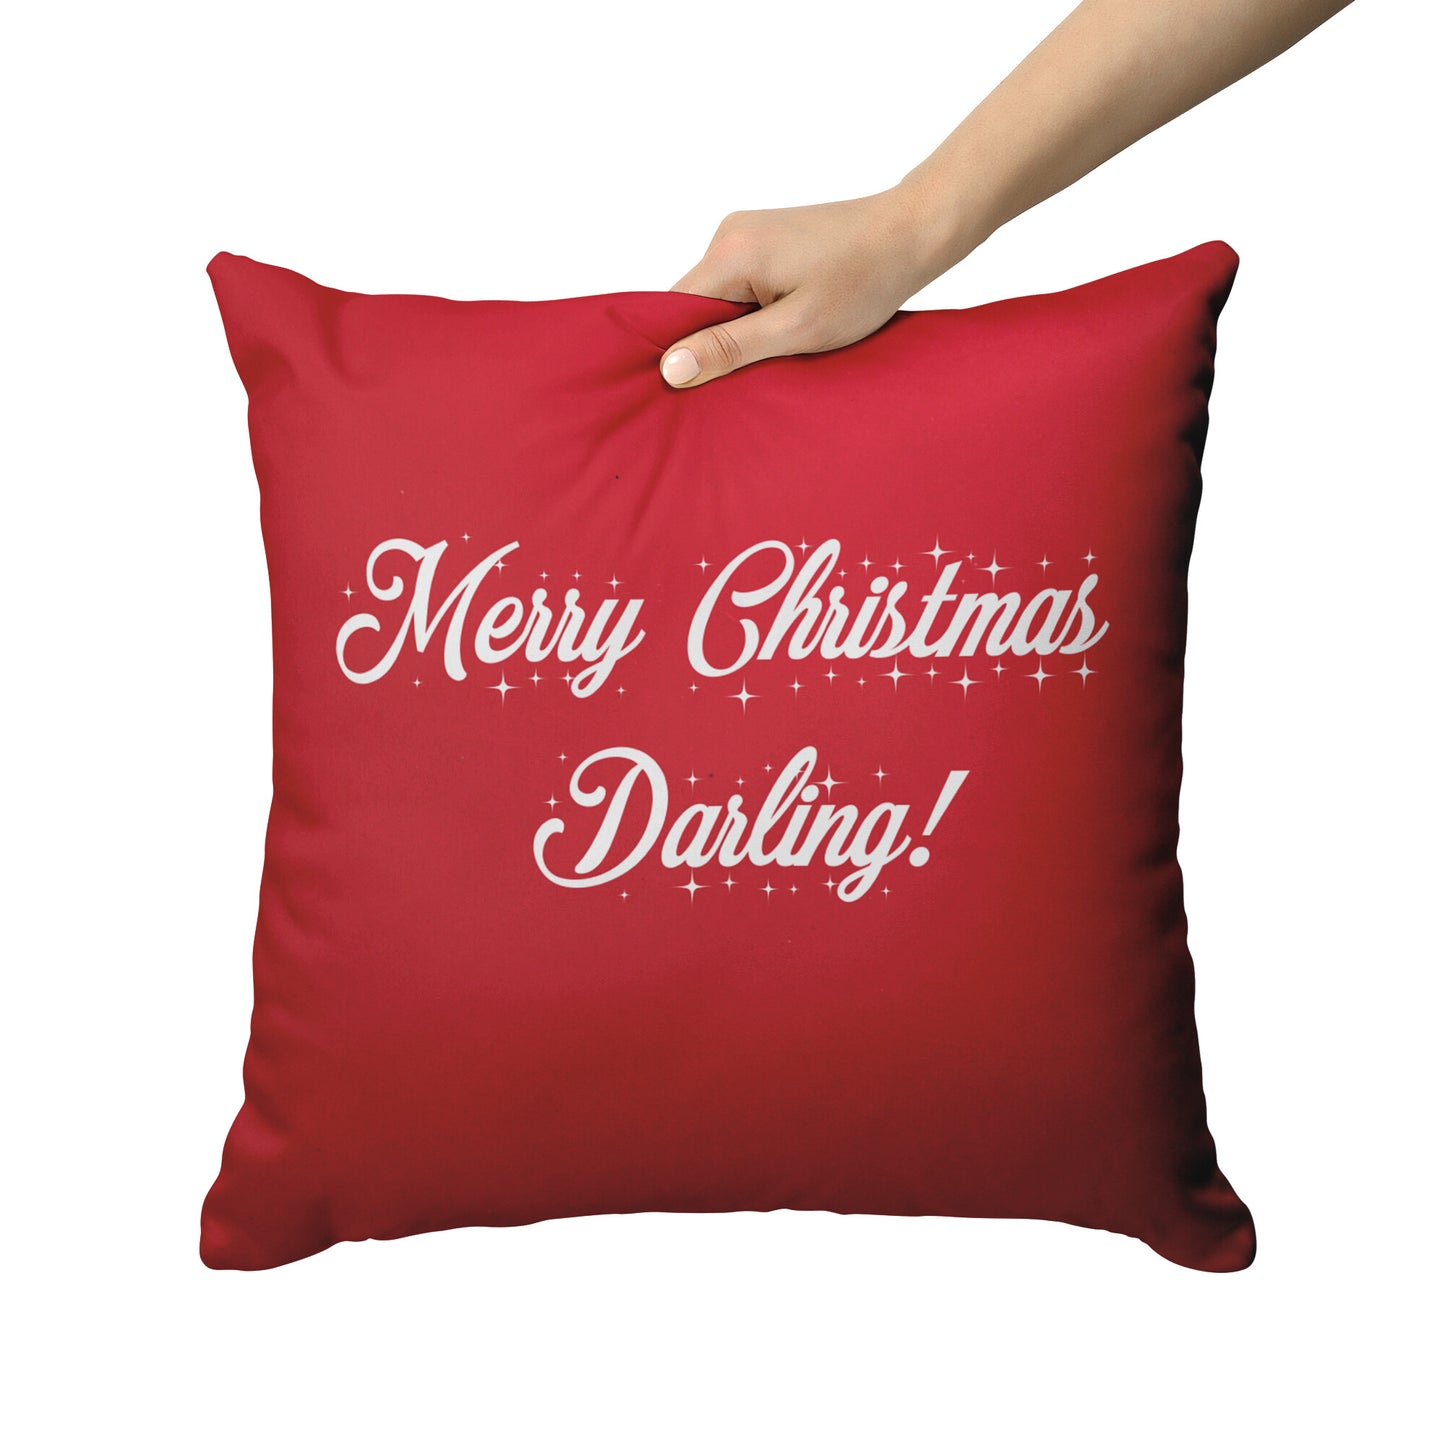 Merry Christmas Darling! Red/White Pillow - Signs and Seasons Gifts